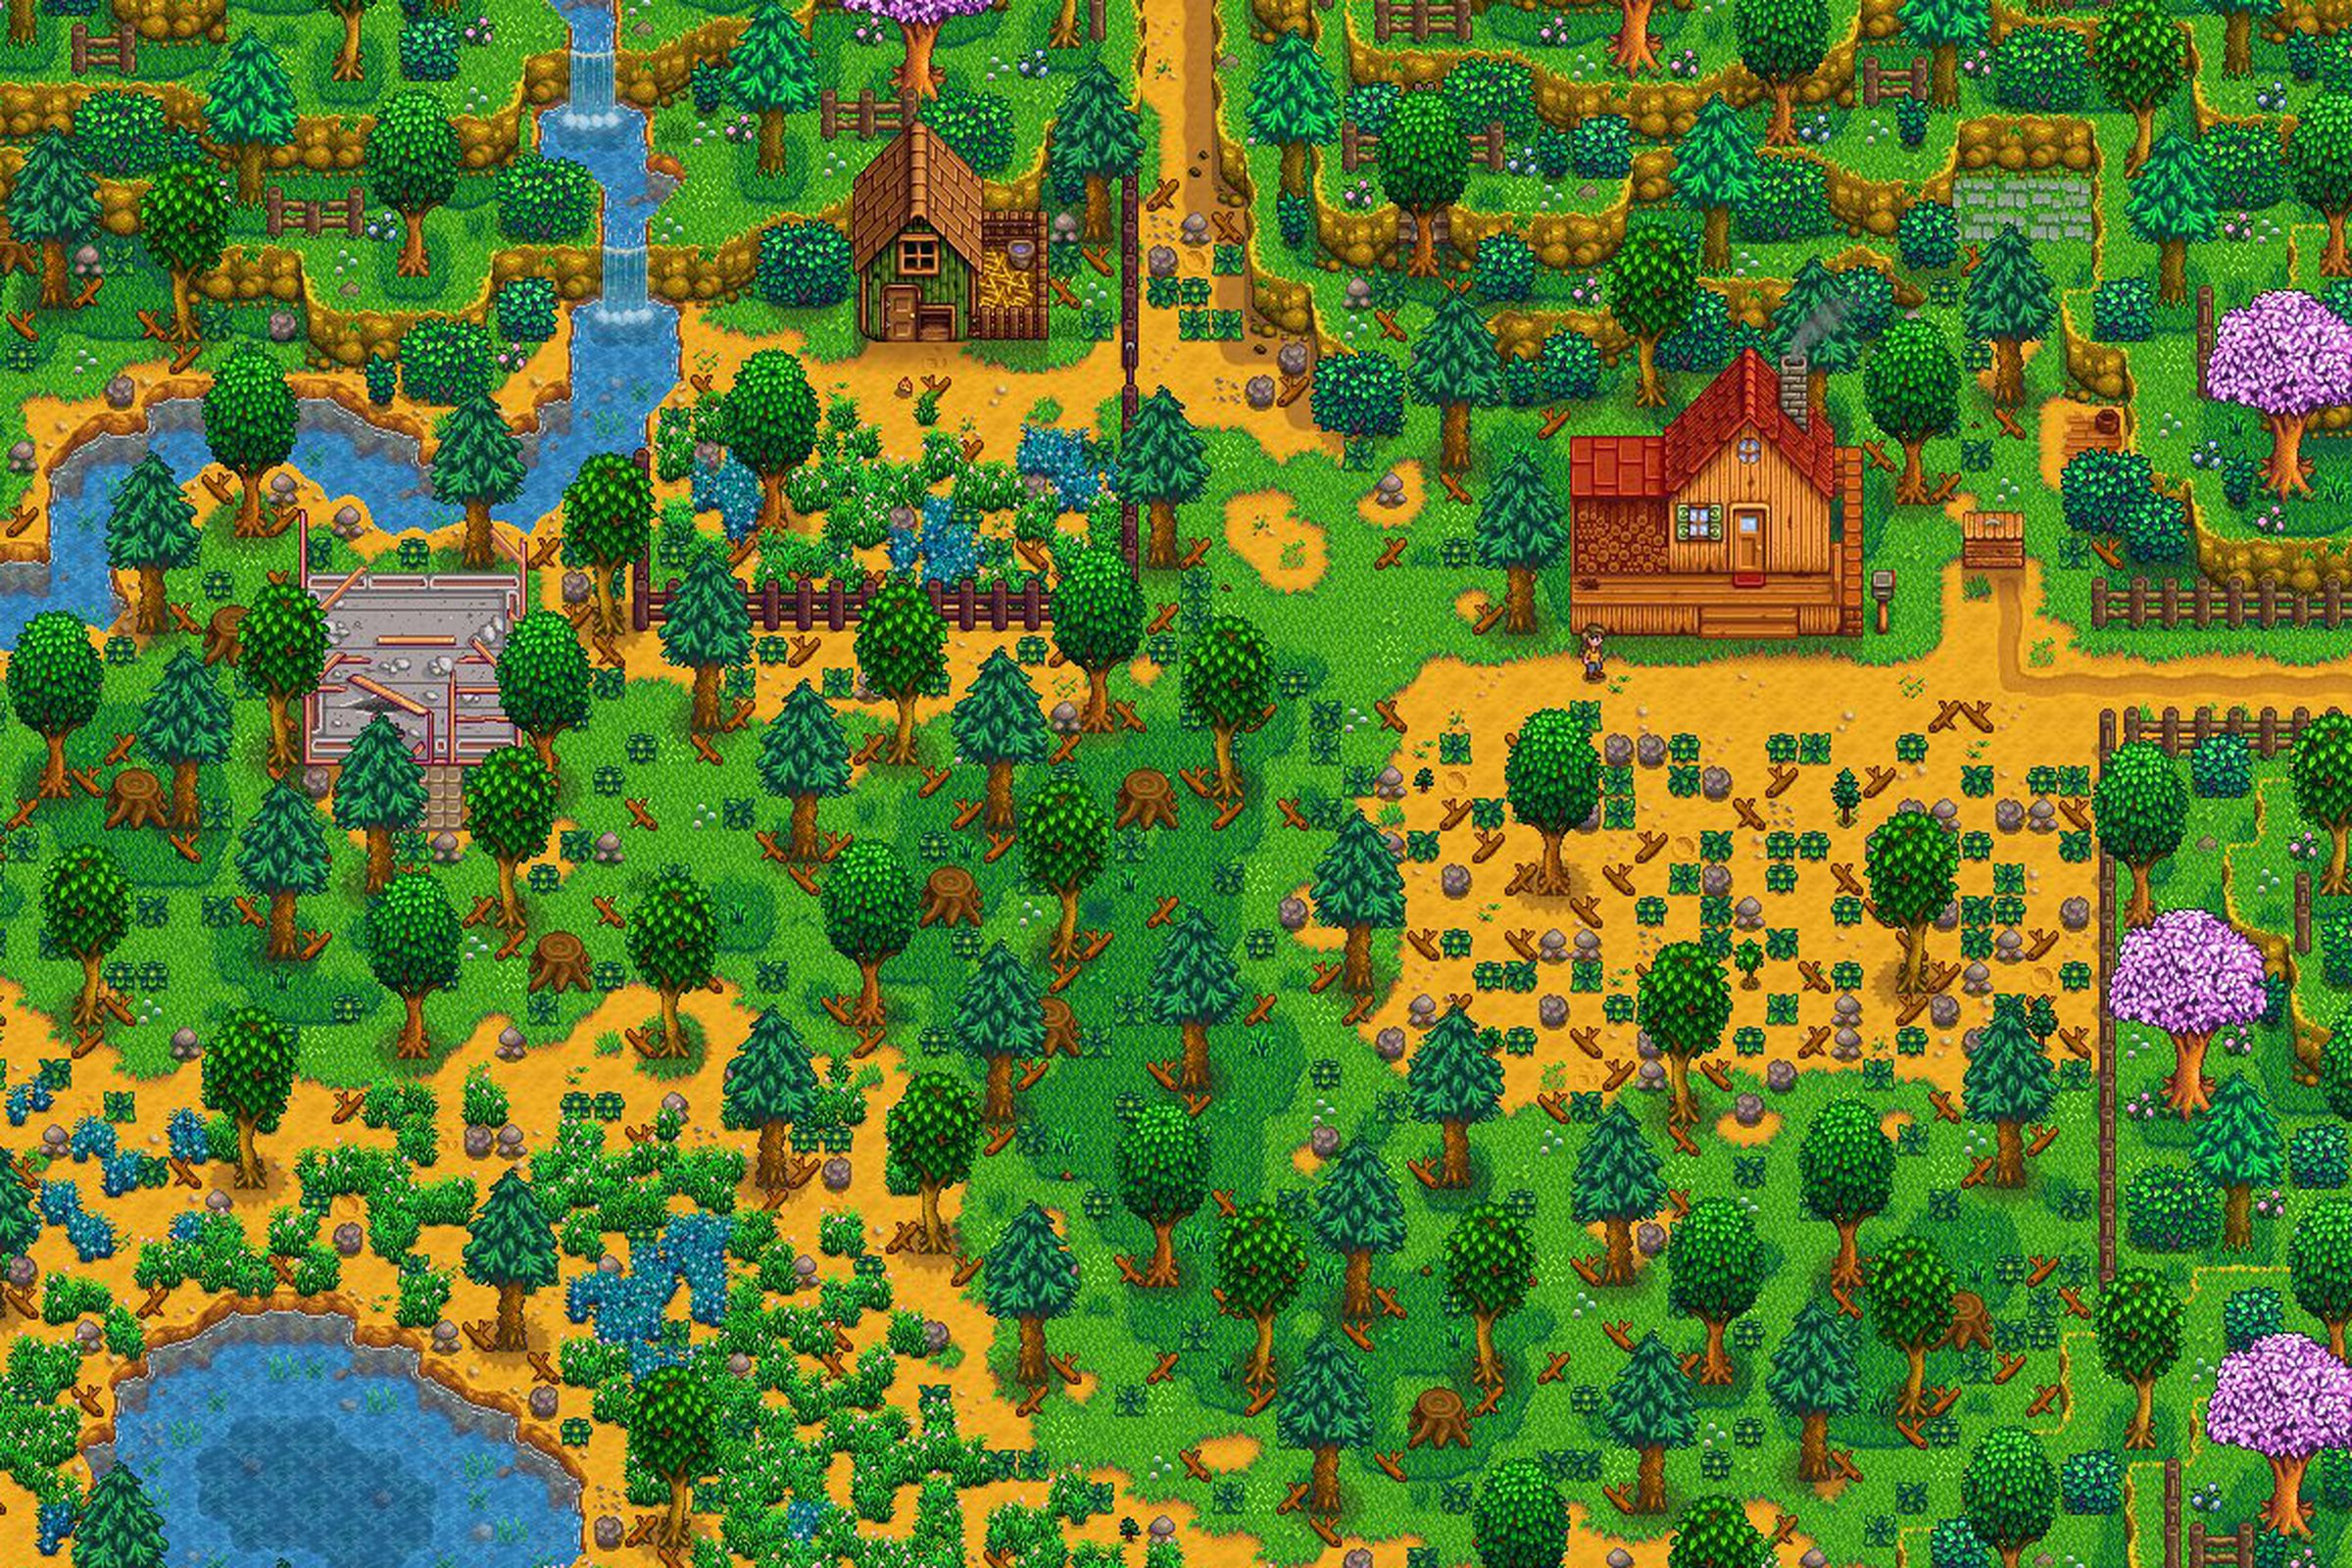 The new Meadowlands farm biome in Stardew Valley’s 1.6 update.